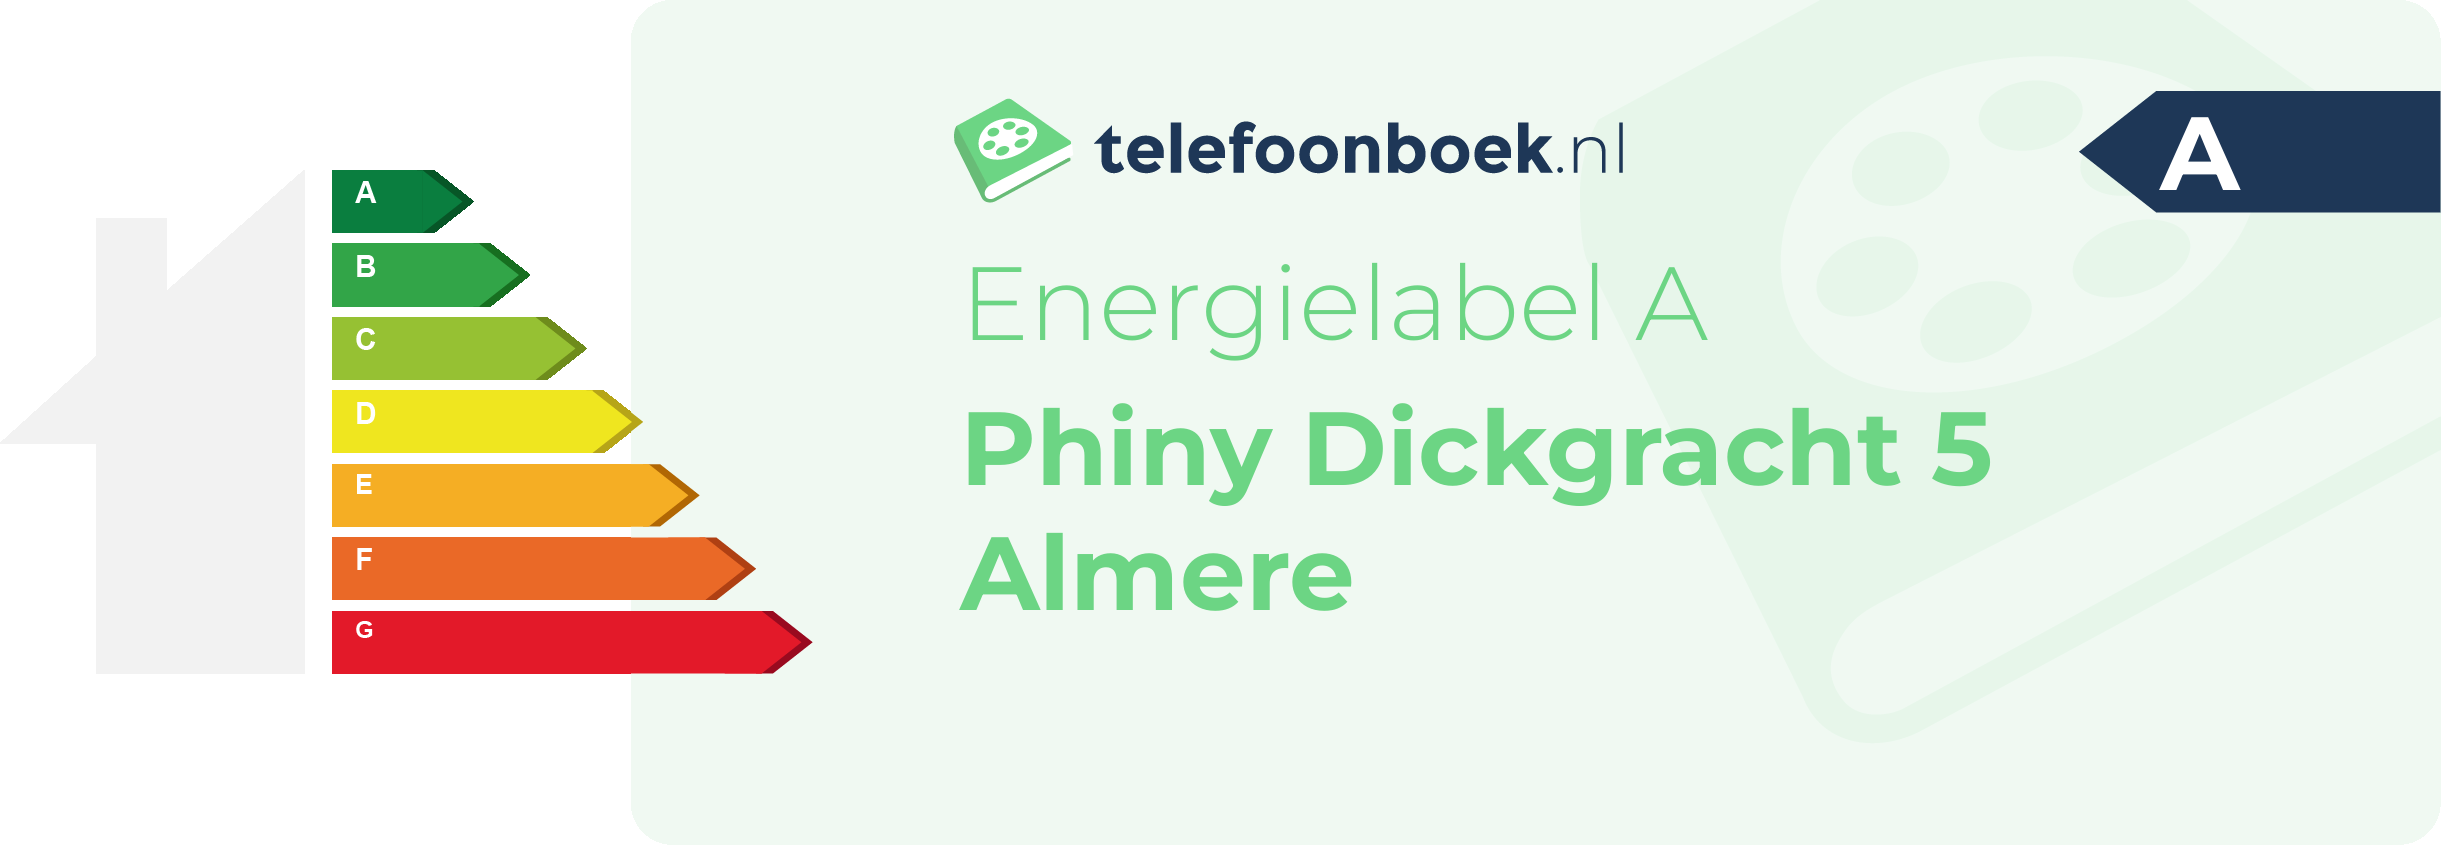 Energielabel Phiny Dickgracht 5 Almere